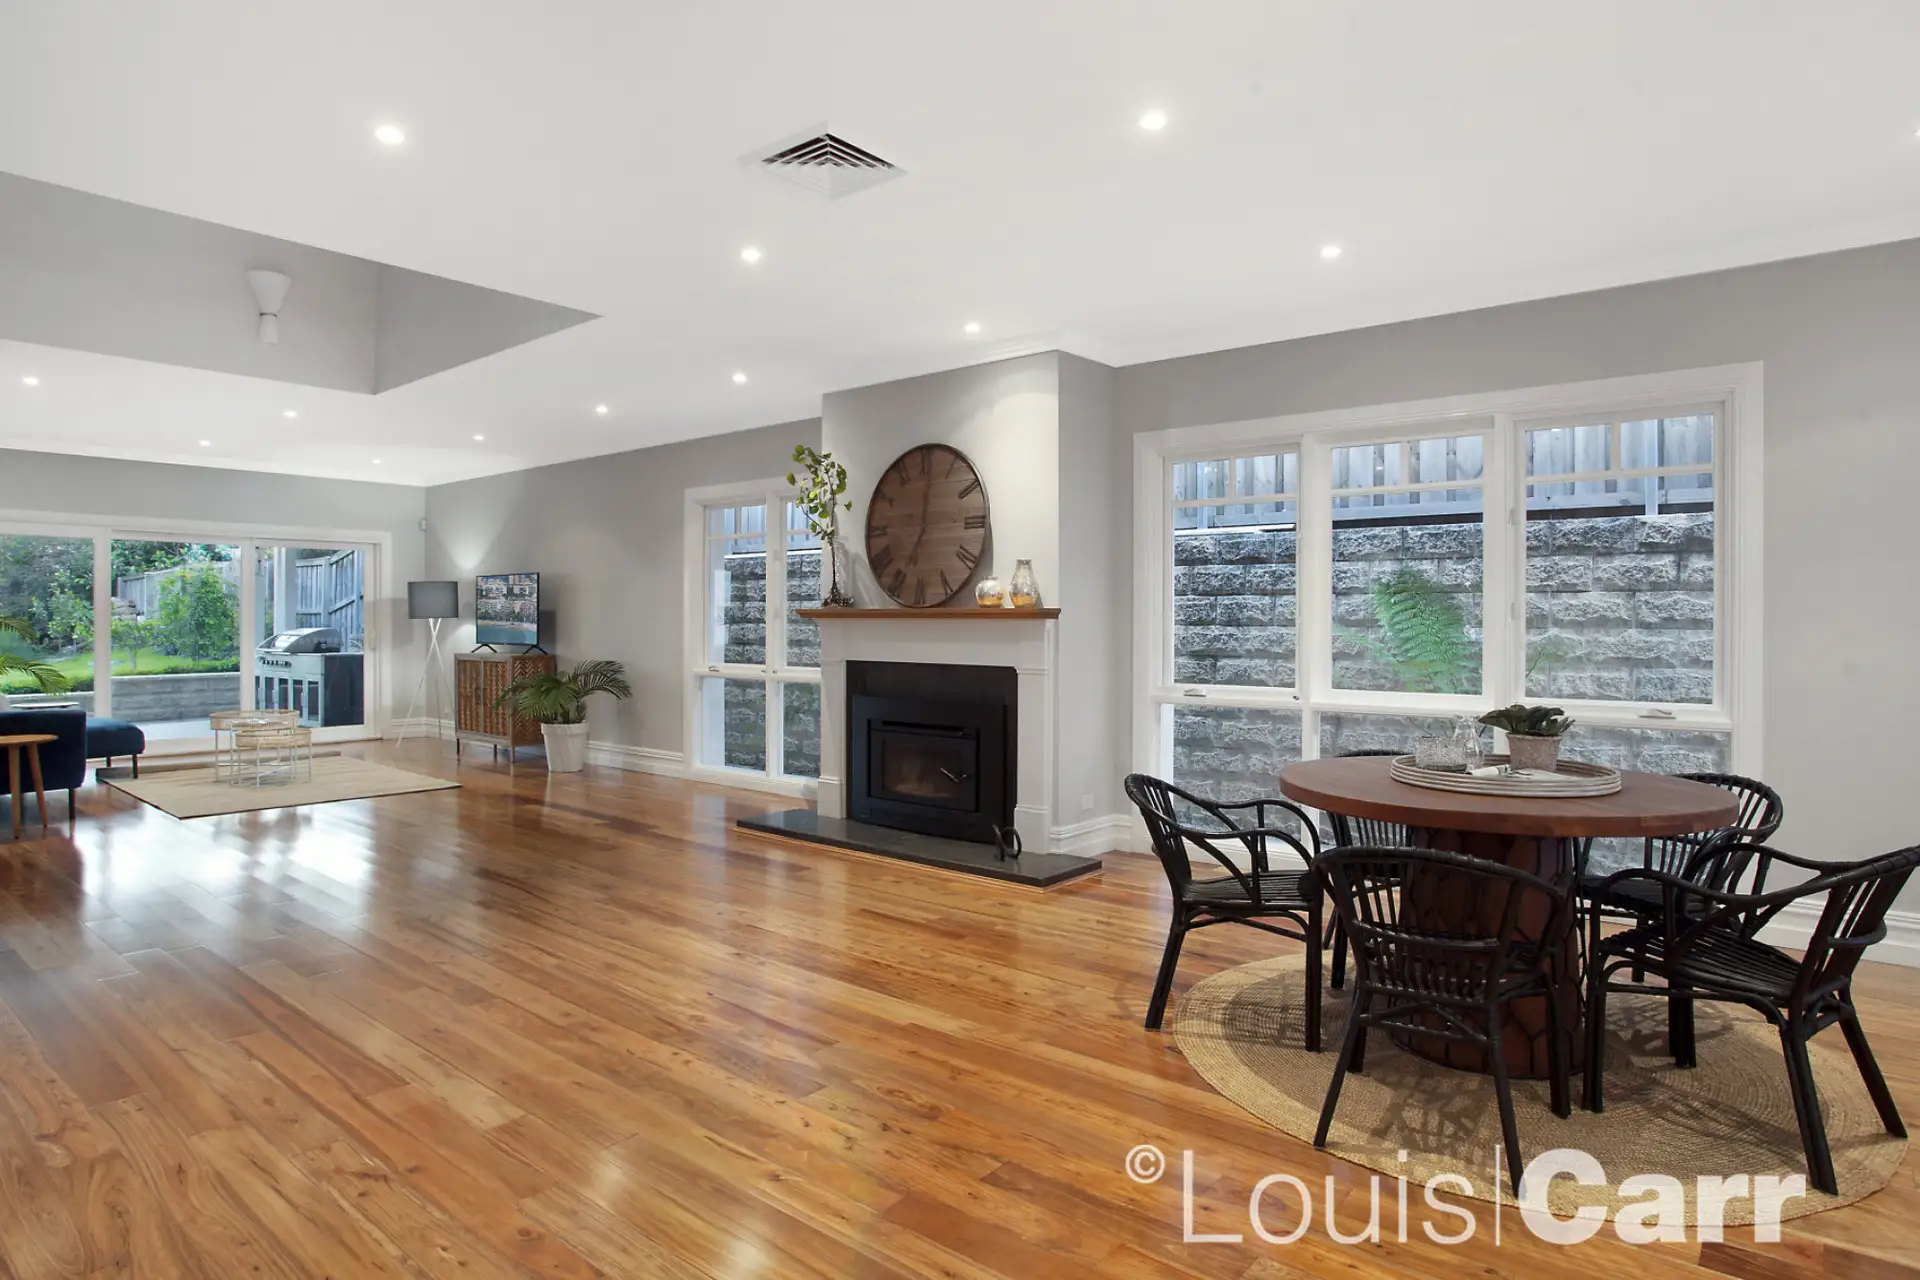 Photo #6: 489a Galston Road, Dural - Sold by Louis Carr Real Estate